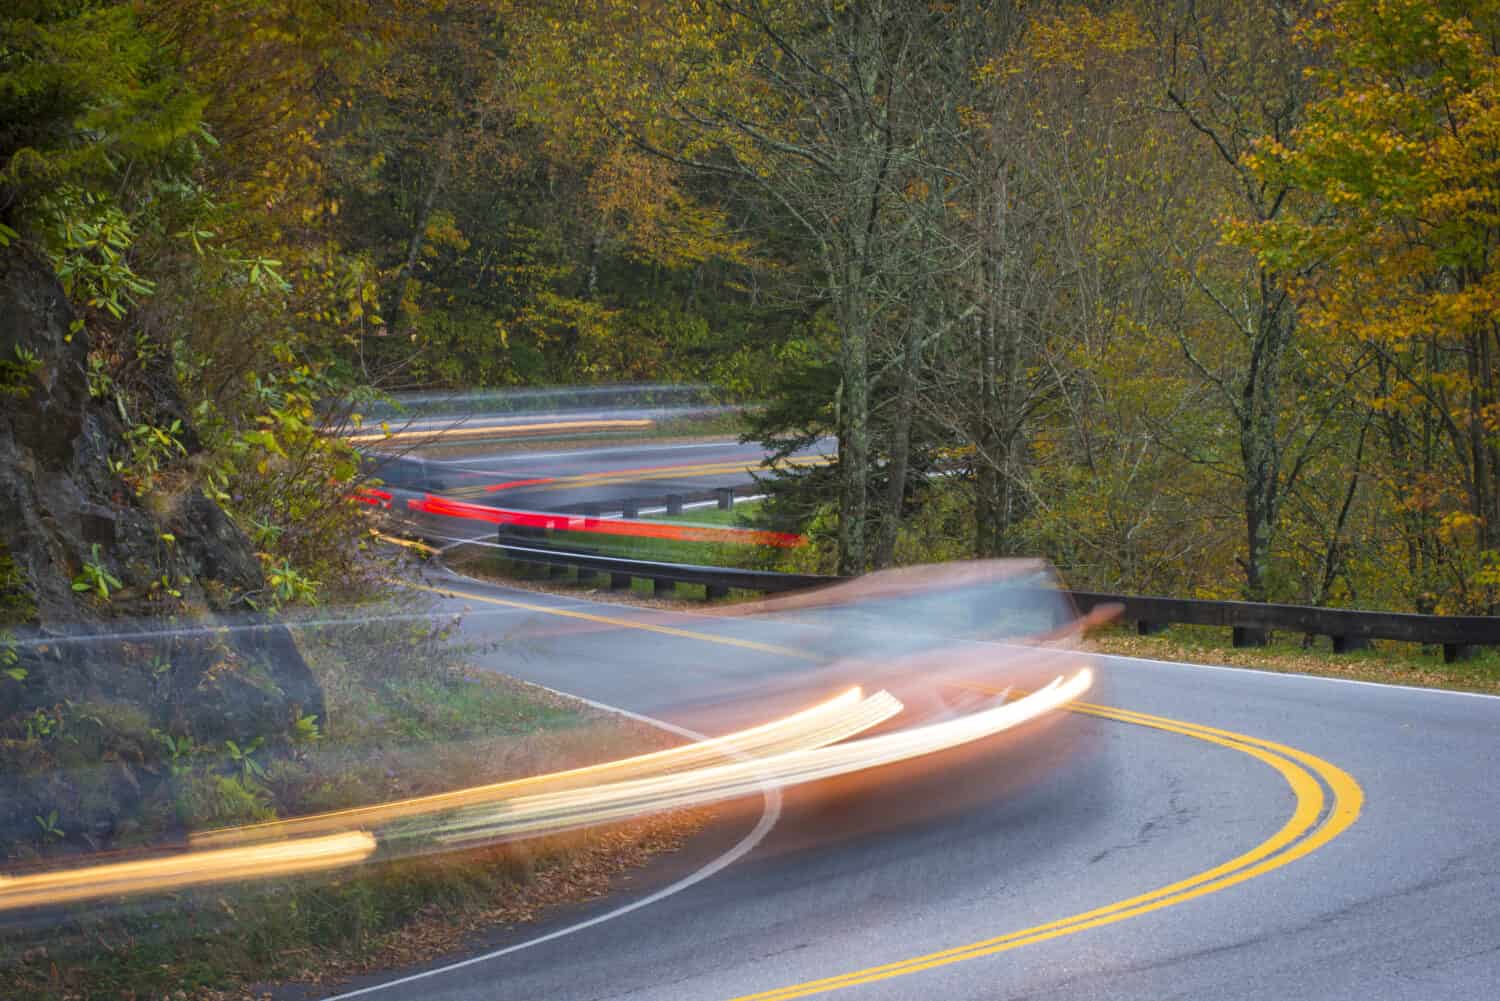 Twisting curvy road winding through fall colorful trees in national park with long exposure car streaks showing motion speed and transportation